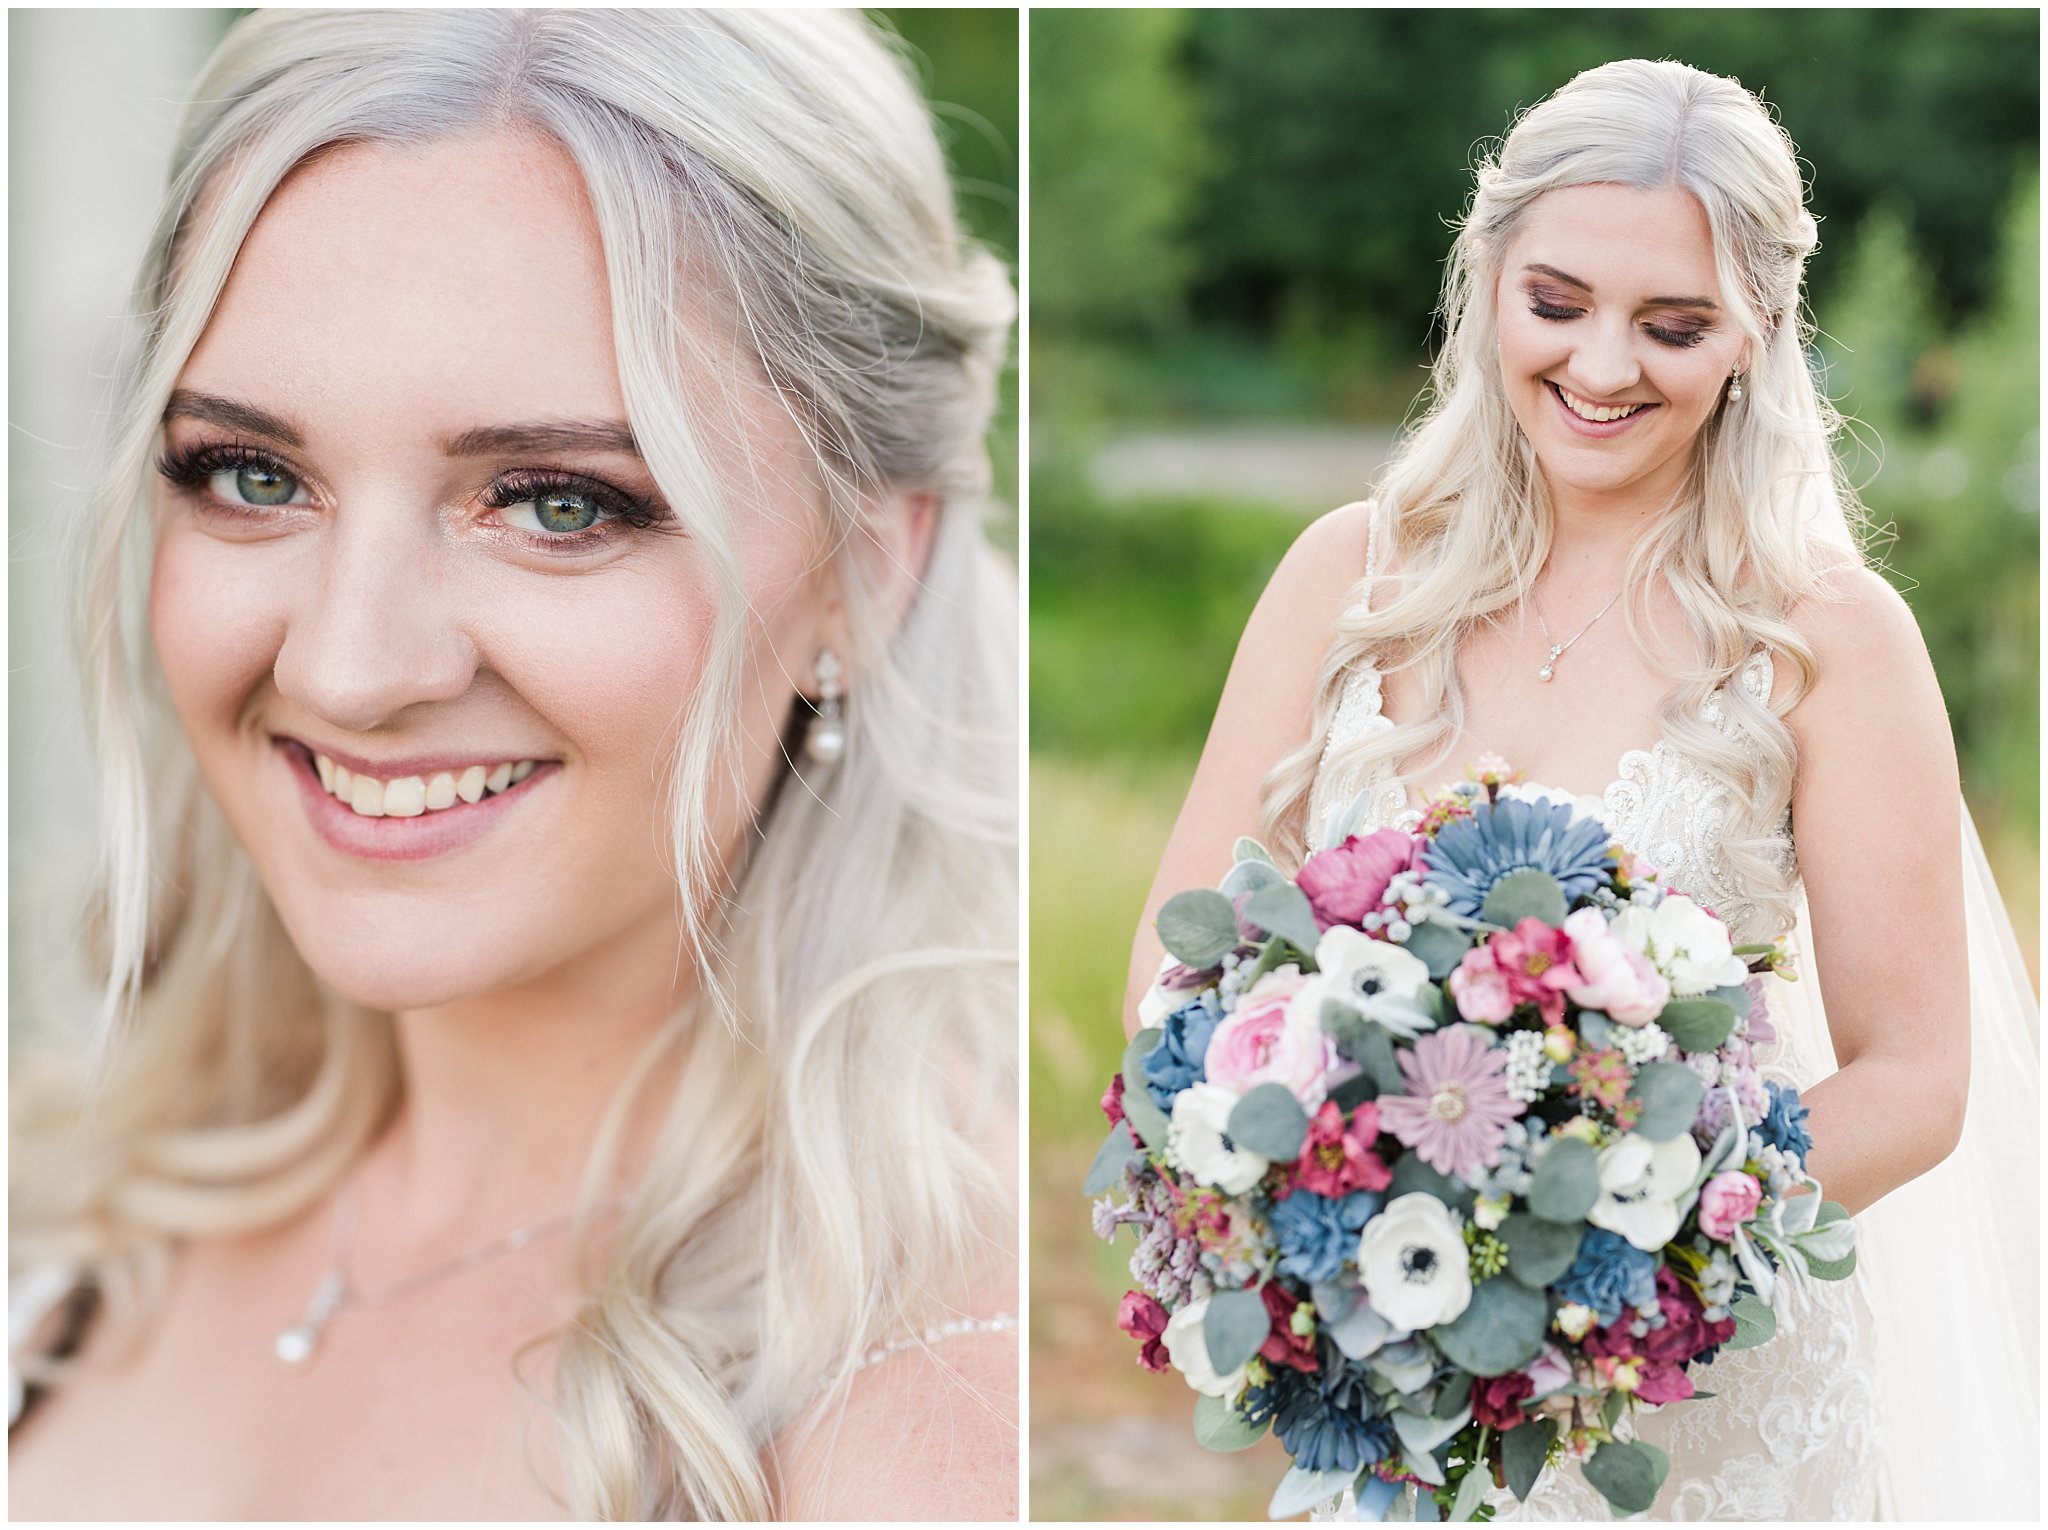 Bride with lace detail dress and long flowing veil | Snowbasin Summer Bridal Session | Jessie and Dallin Photography